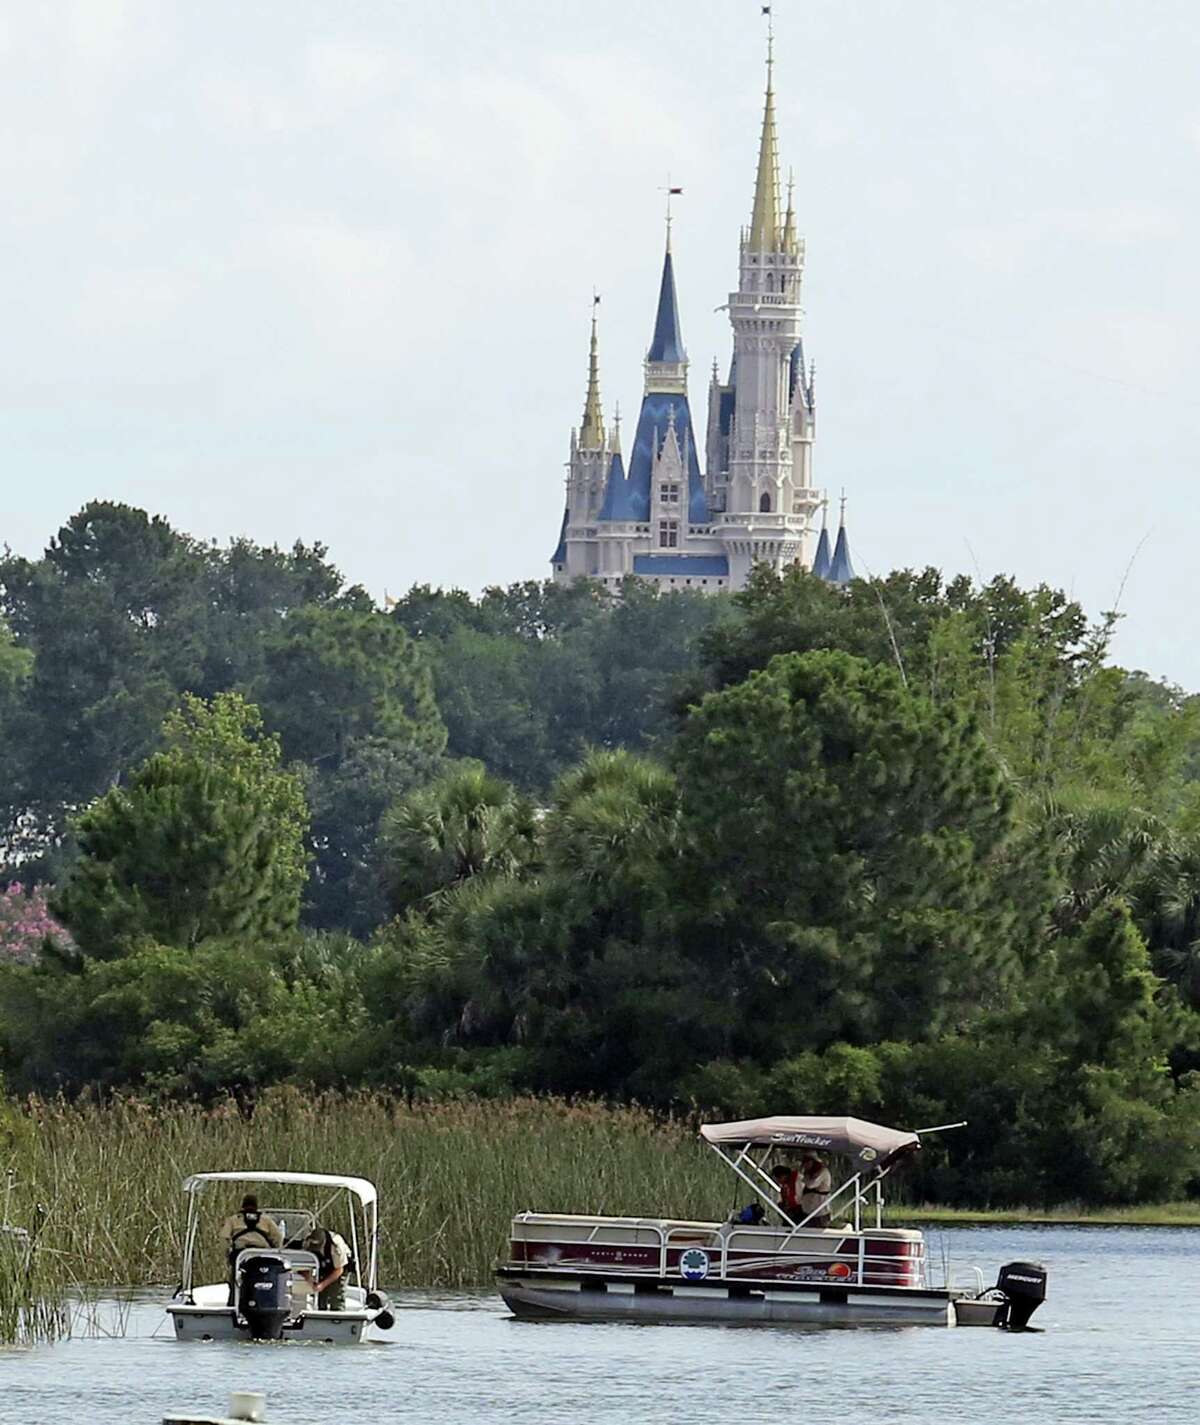 In the shadow of the Magic Kingdom Florida Fish and Wildlife Conservation Officers search for the body of a young boy Wednesday, June 15, 2016 after the boy was snatched off the shore and dragged underwater by an alligator Tuesday night at Grand Floridian Resort at Disney World in Lake Buena Vista, Fla.